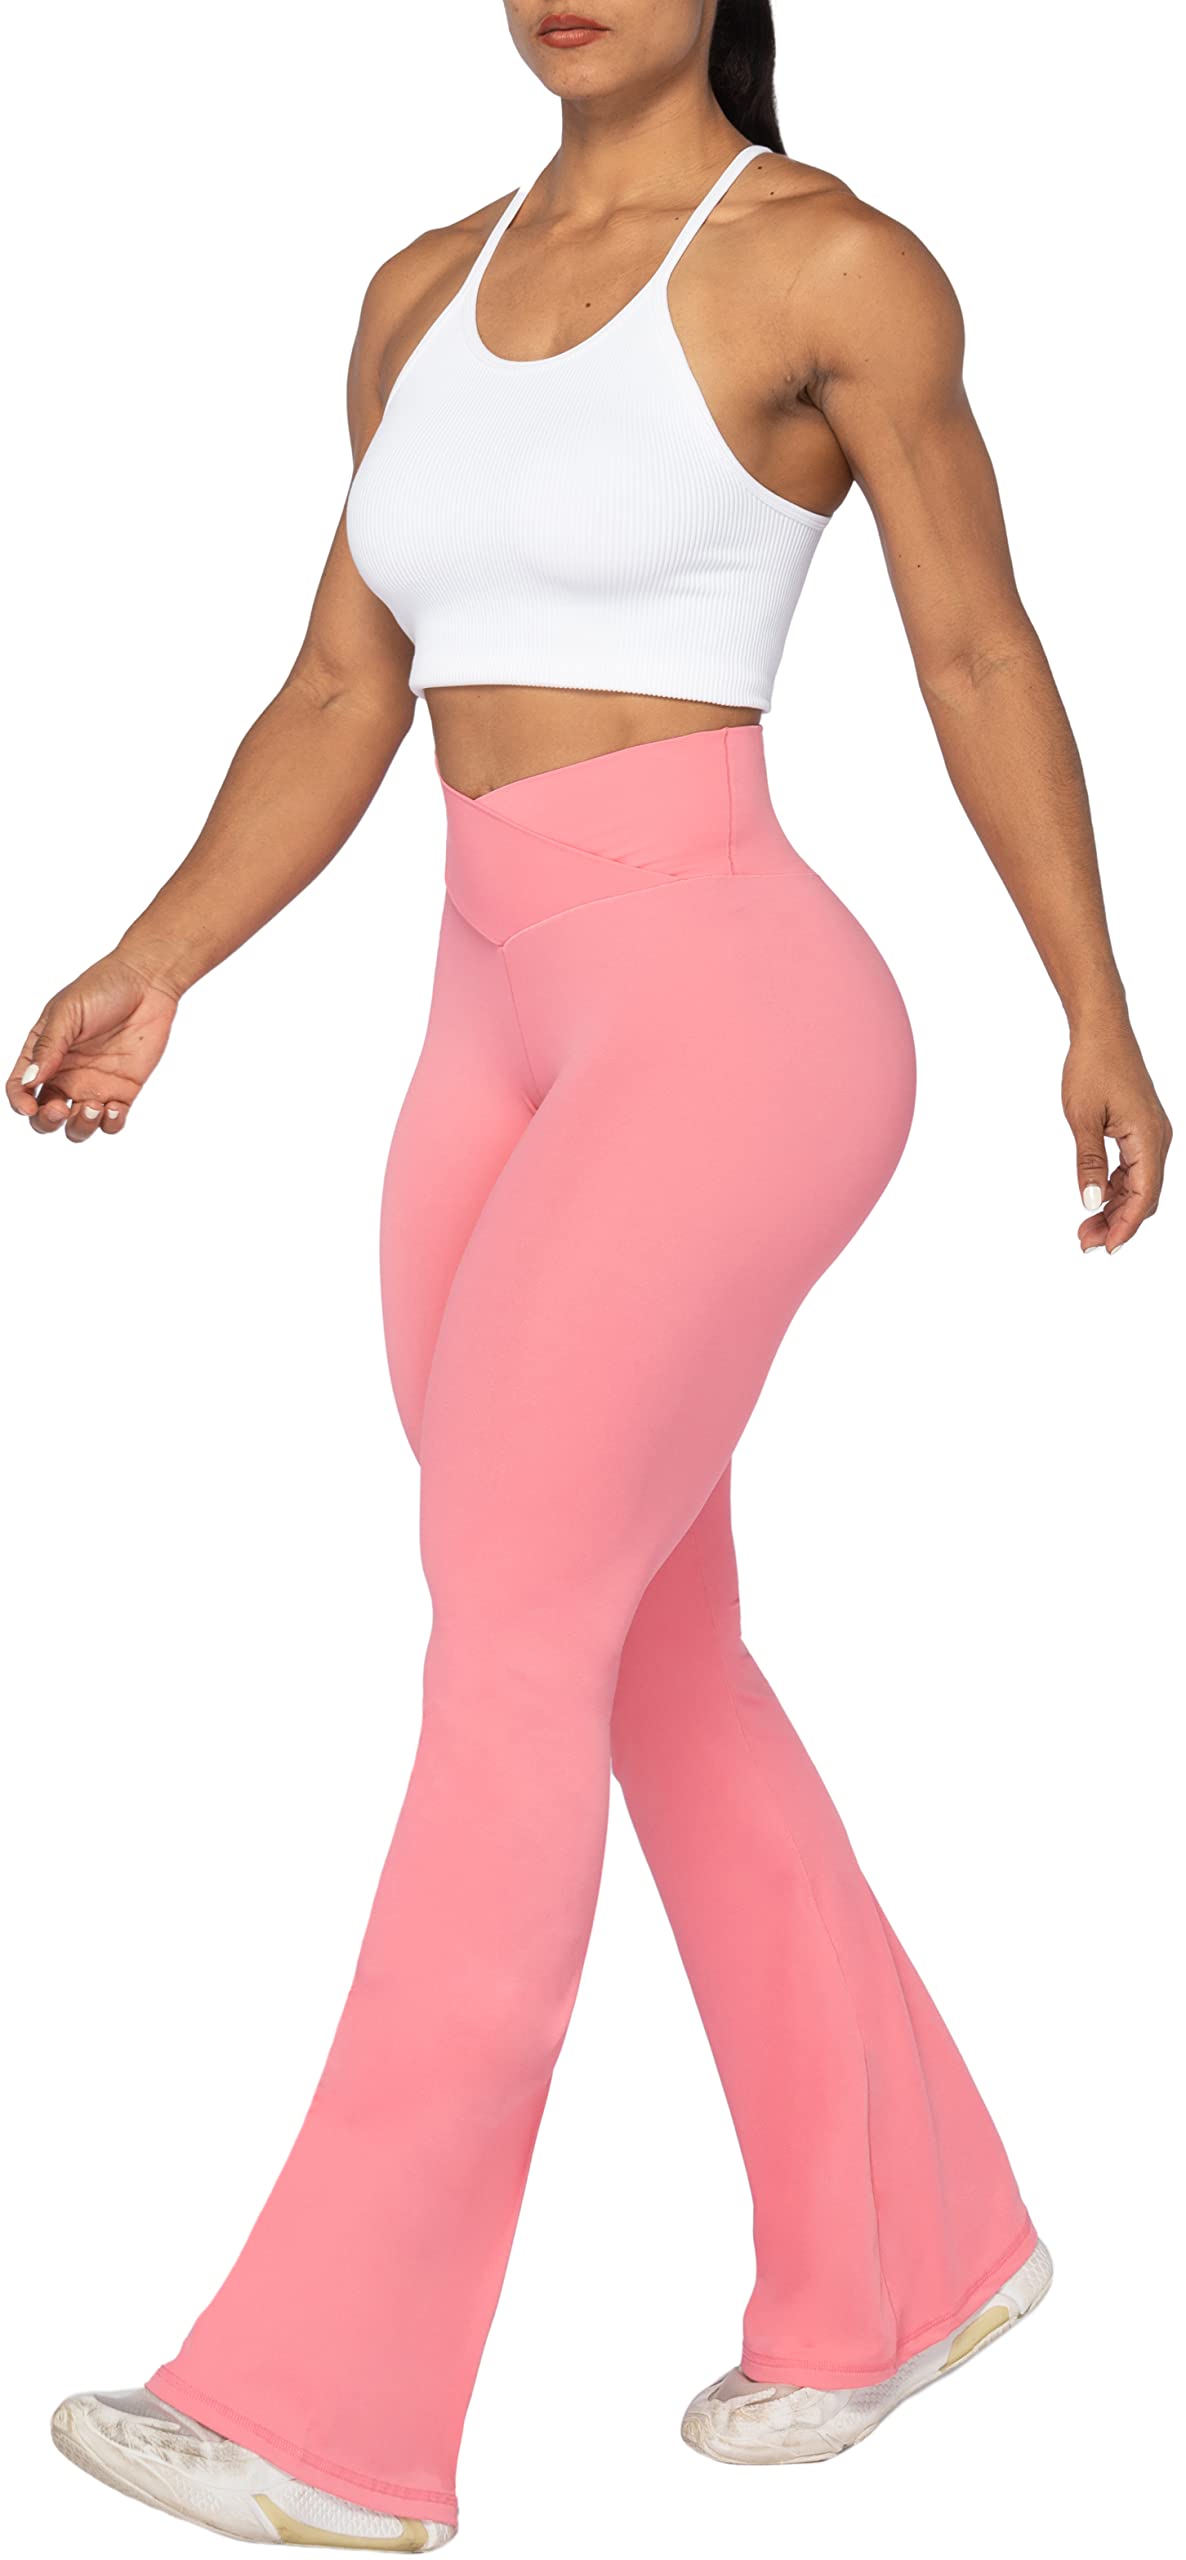 Buy Sunzel Flare Leggings, Crossover Yoga Pants with Tummy Control